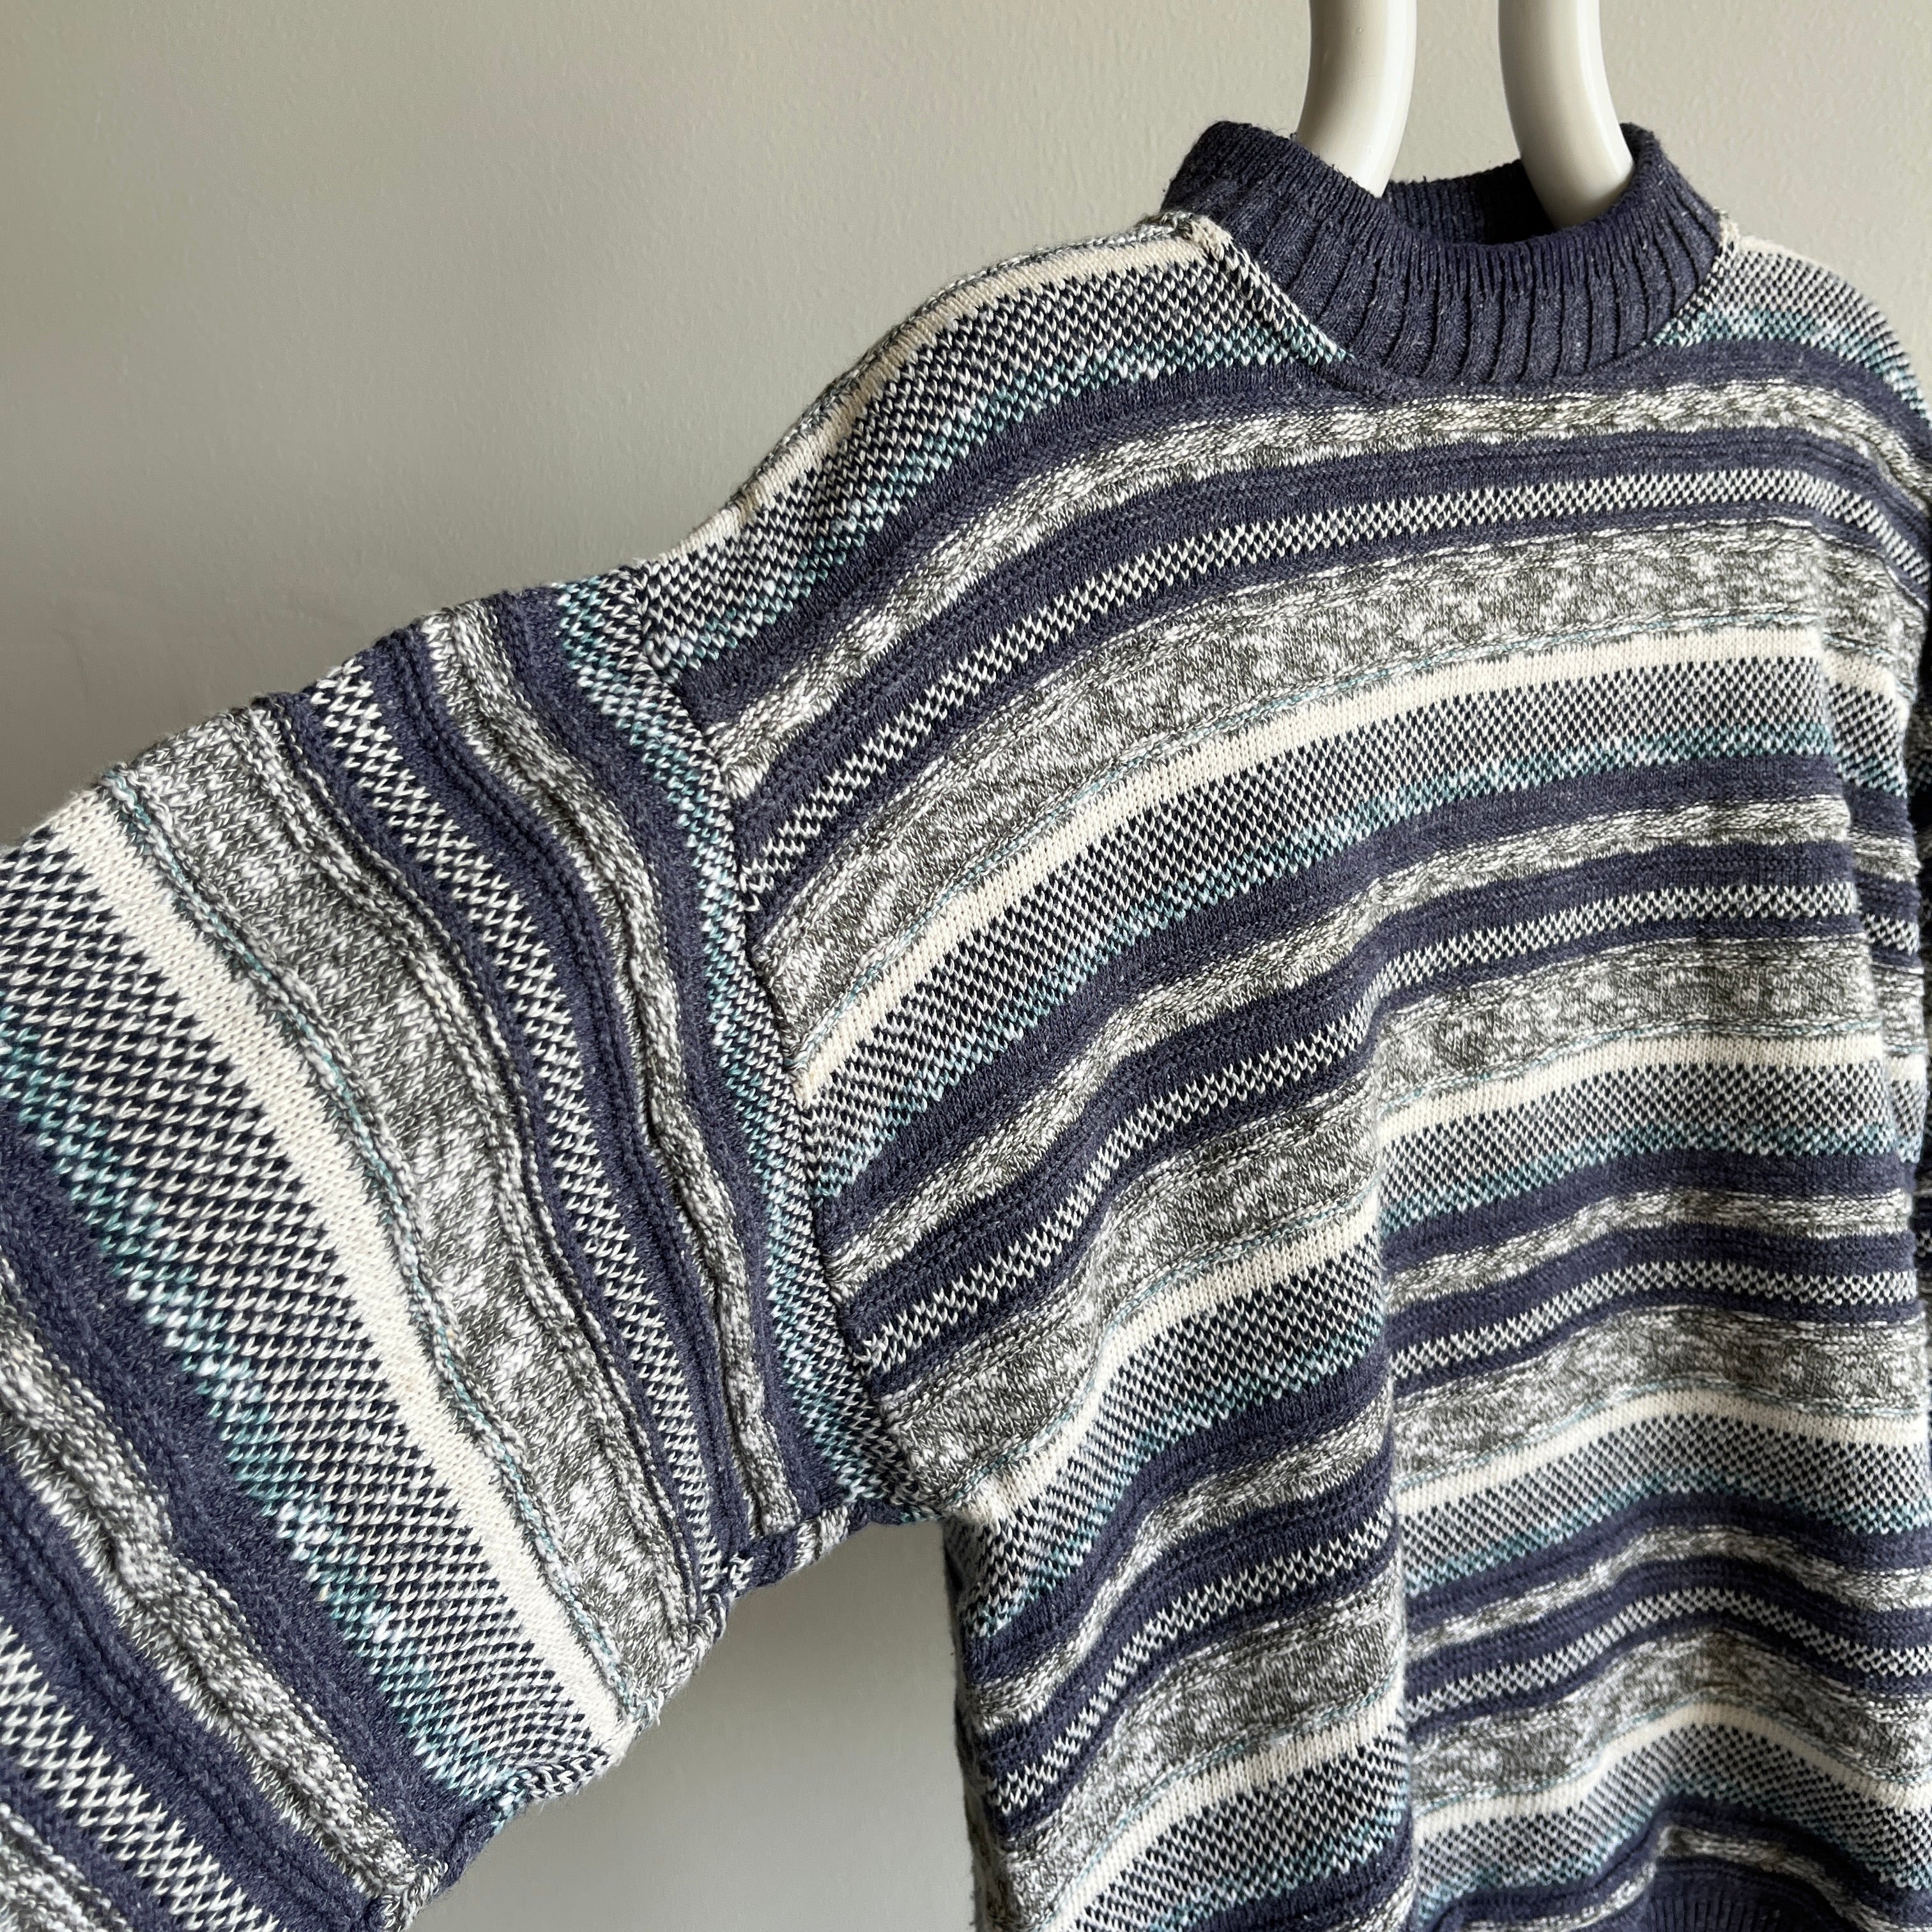 1990/2000s Cooji Style Sweater - Made in Italy, Cotton Blend